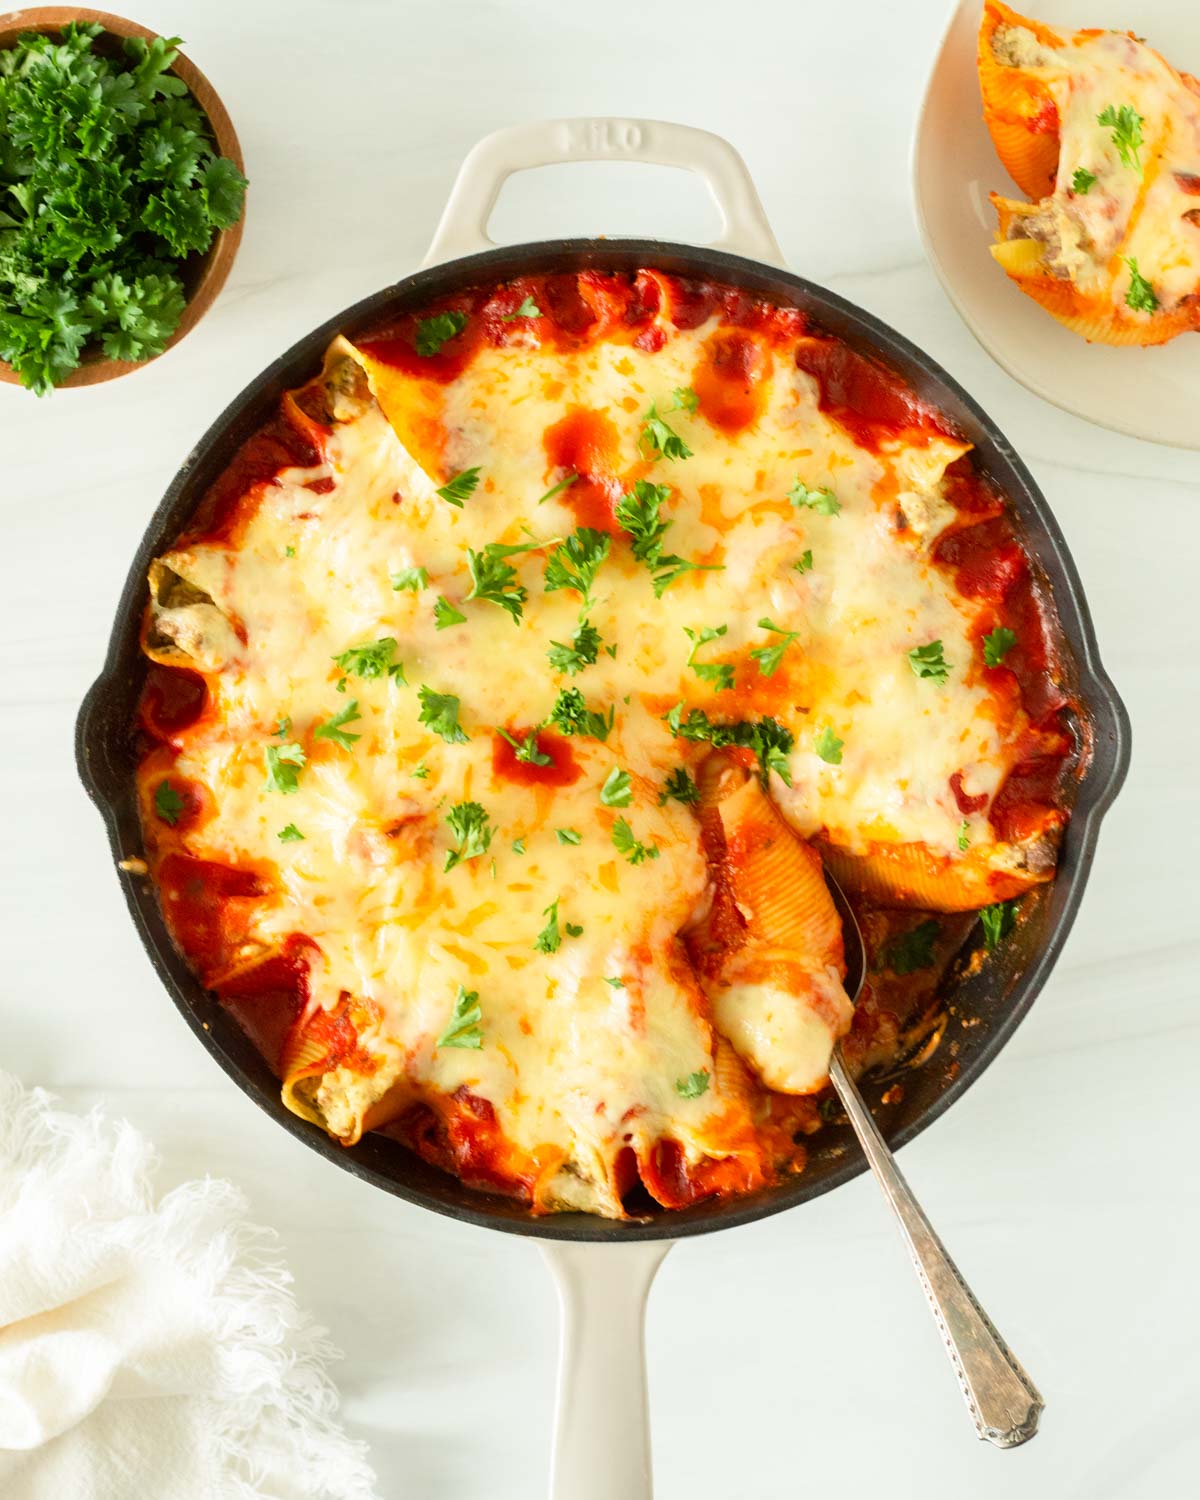 This recipe for lasagna stuffed shells is an easy one-skillet dinner recipe made with jumbo shells stuffed with classic lasagna ingredients and baked in the oven.